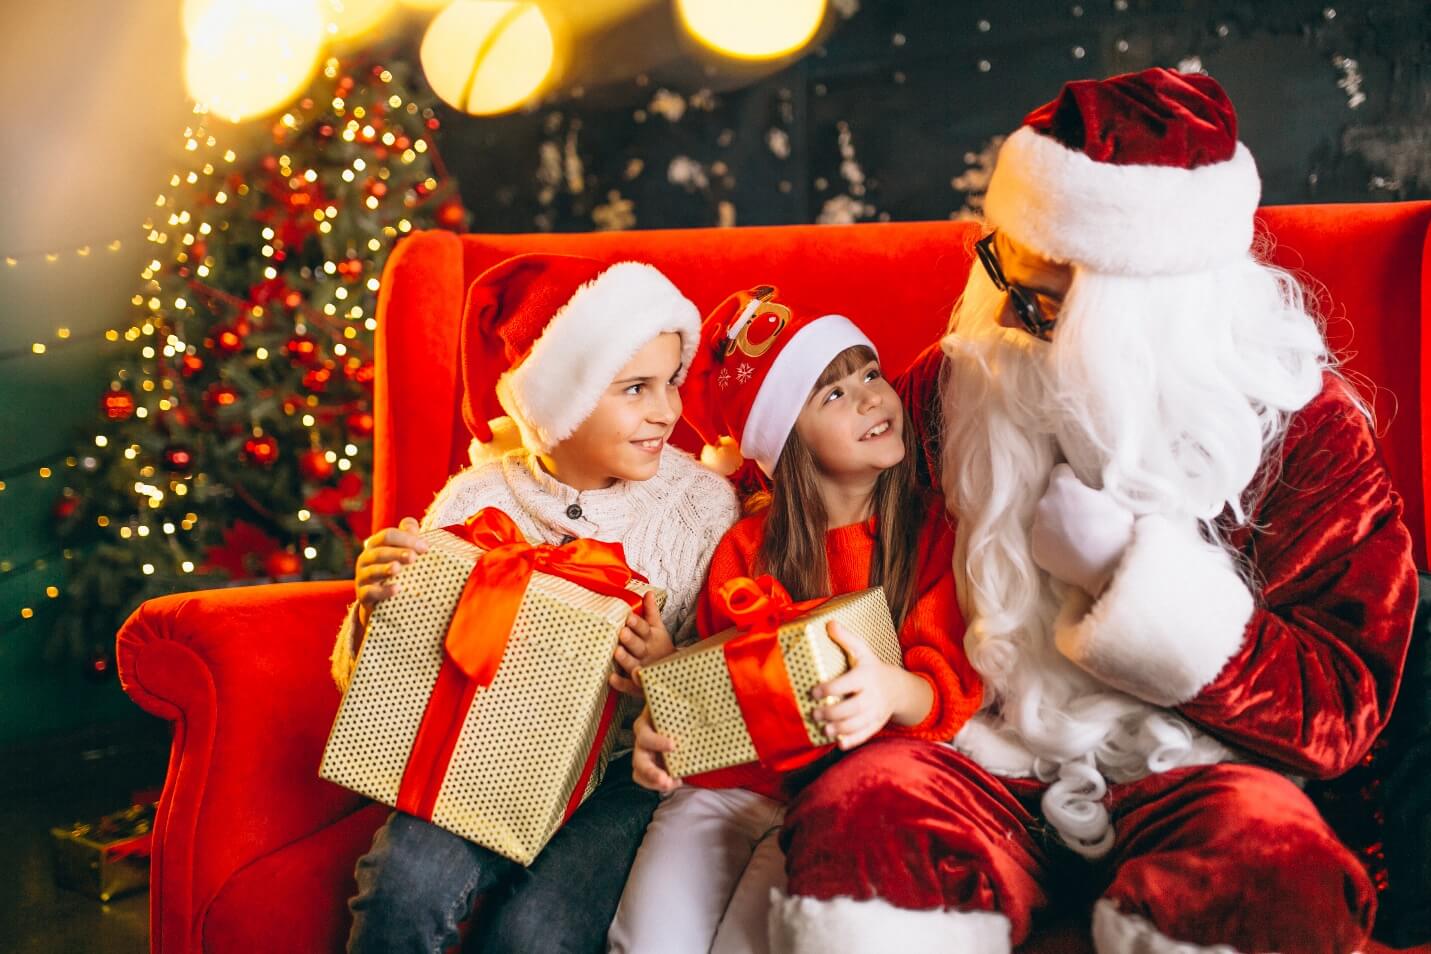 Santa talking to two kids sitting on a chair